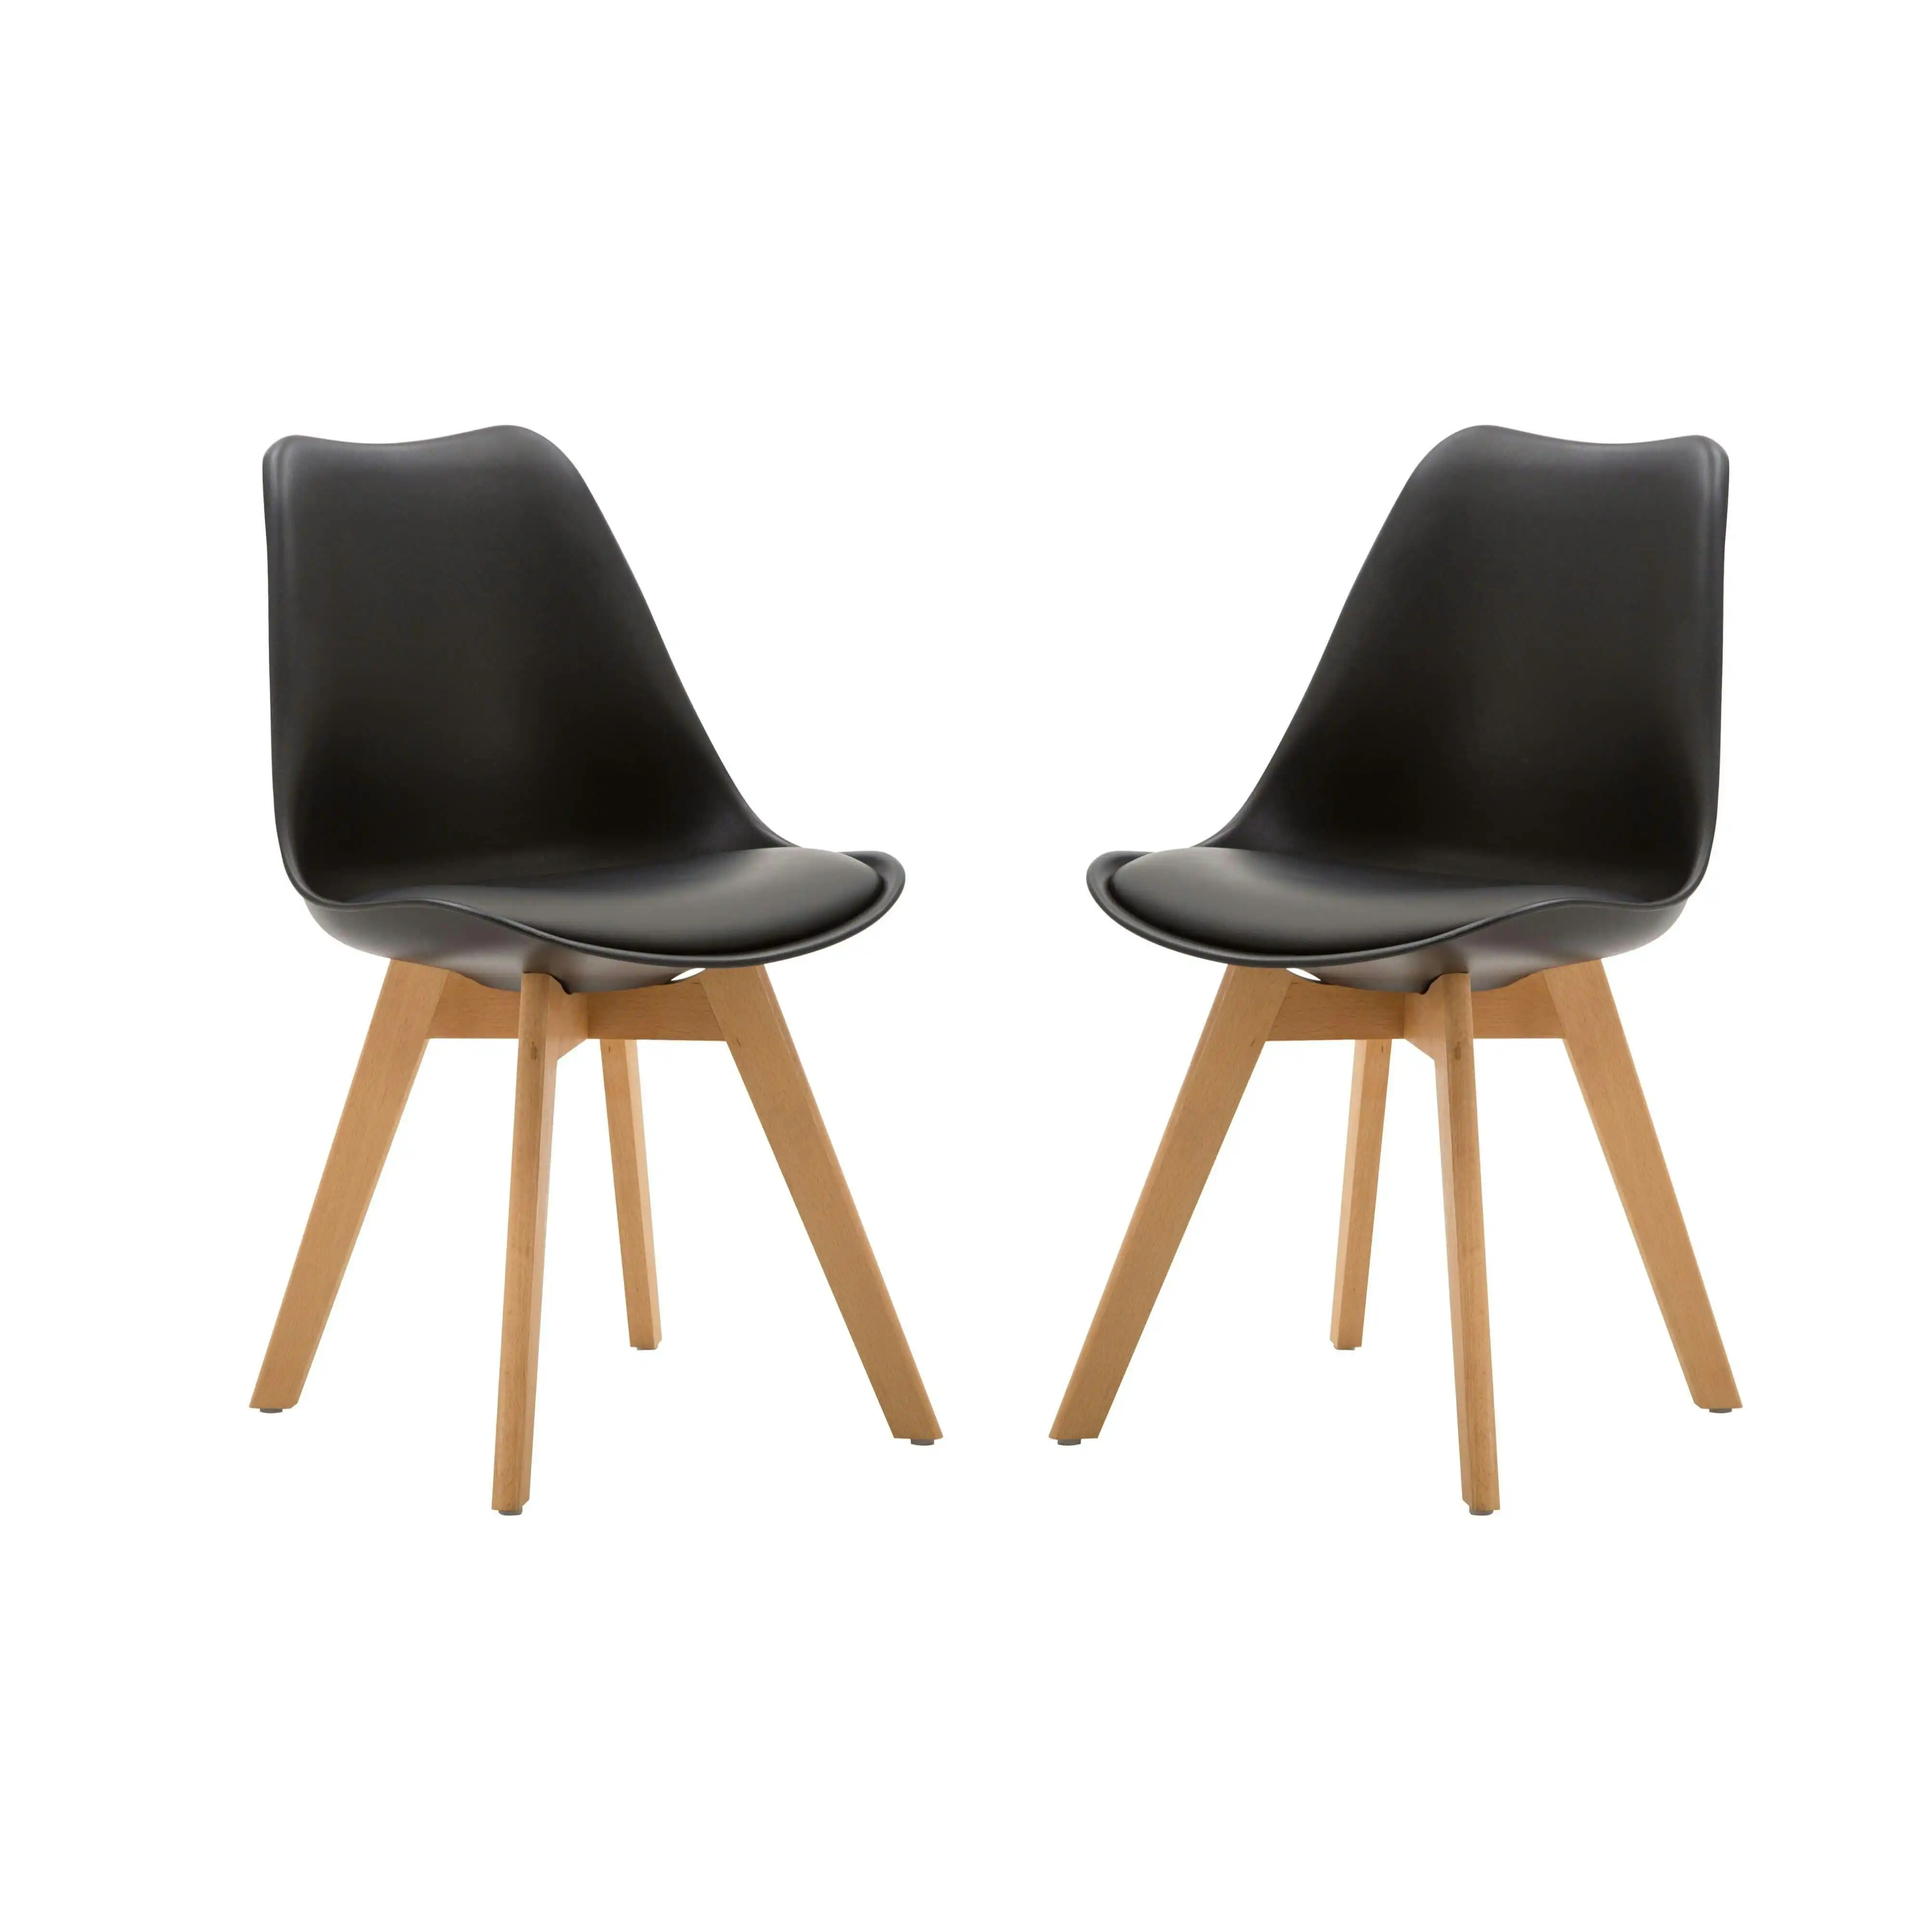 Chotto - Ando Dining Chairs - Black x 2